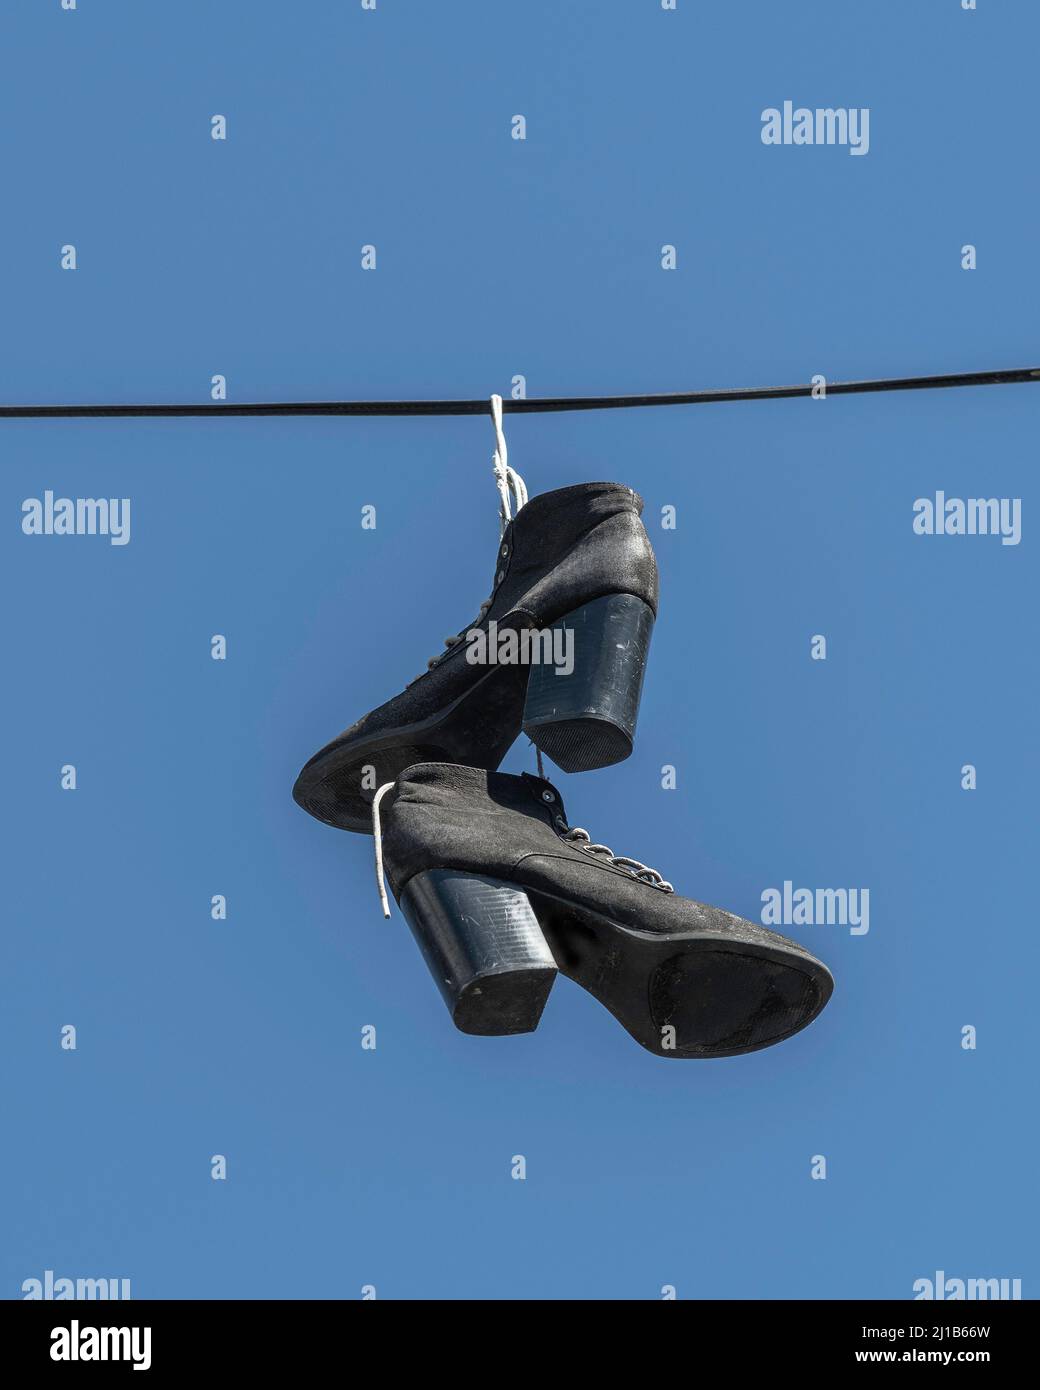 A pair of women's boots hang on a wire in Los Angeles, CA. Stock Photo